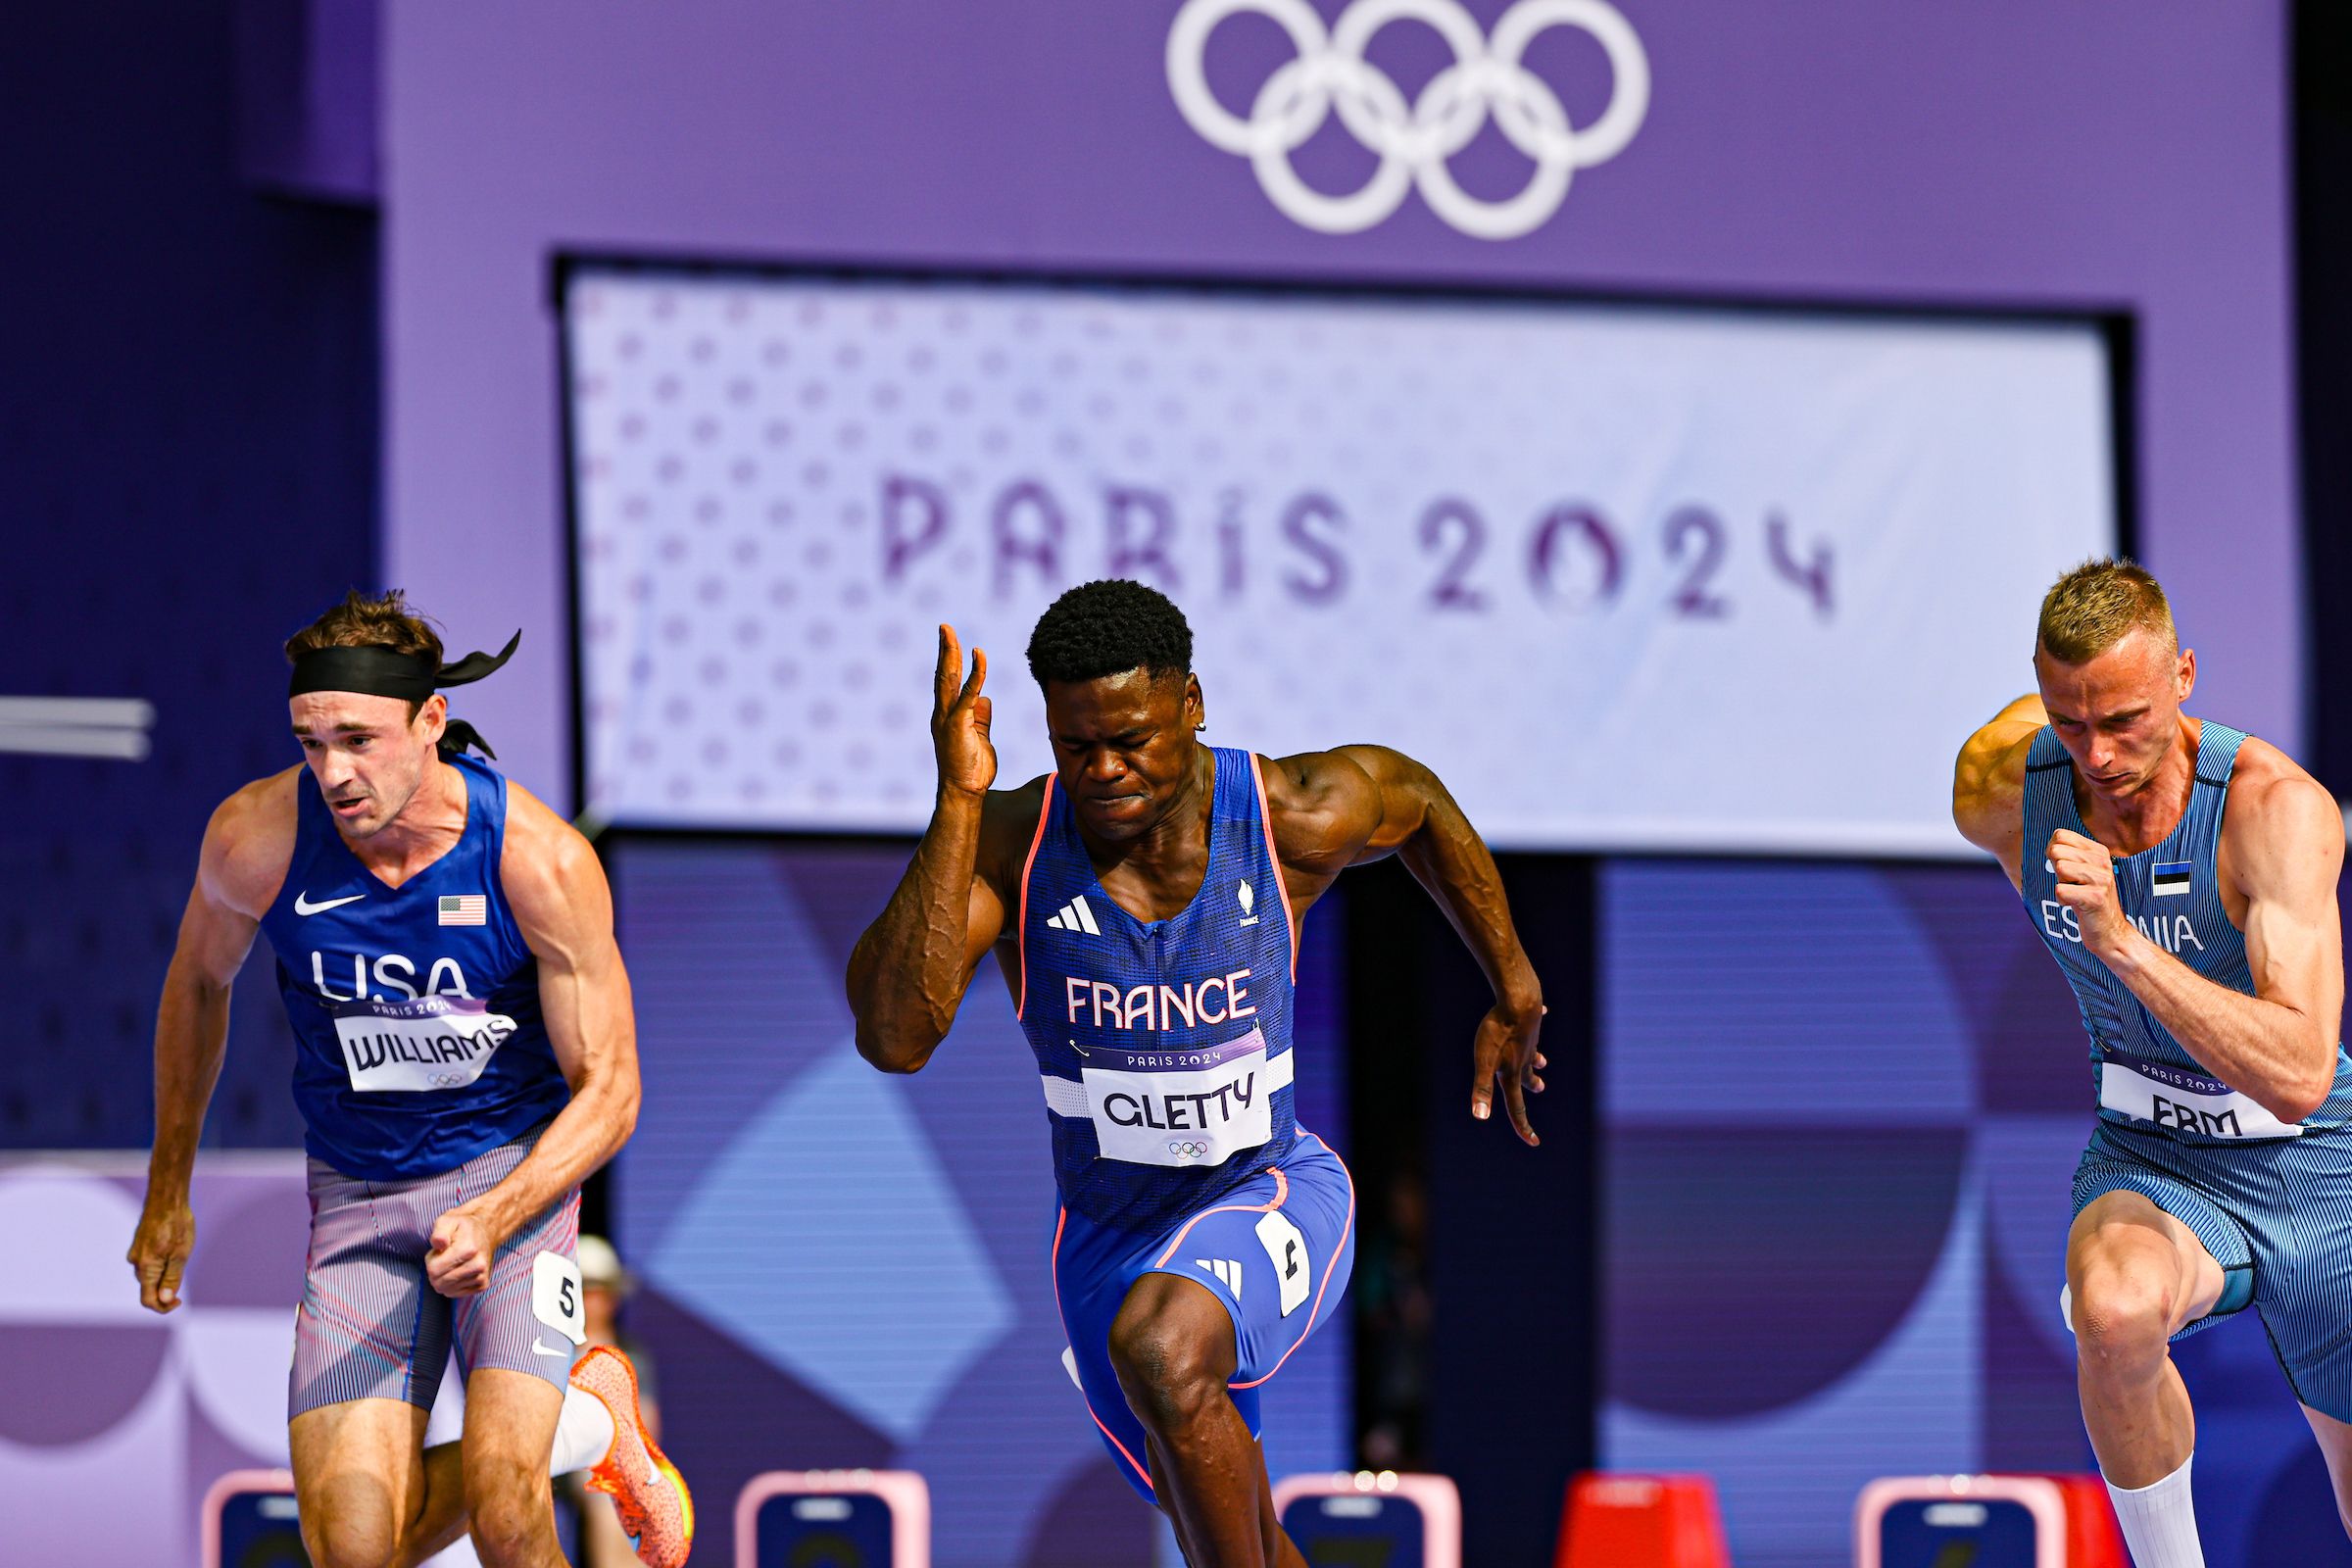 Makenson Gletty in action at the Paris 2024 Olympic Games